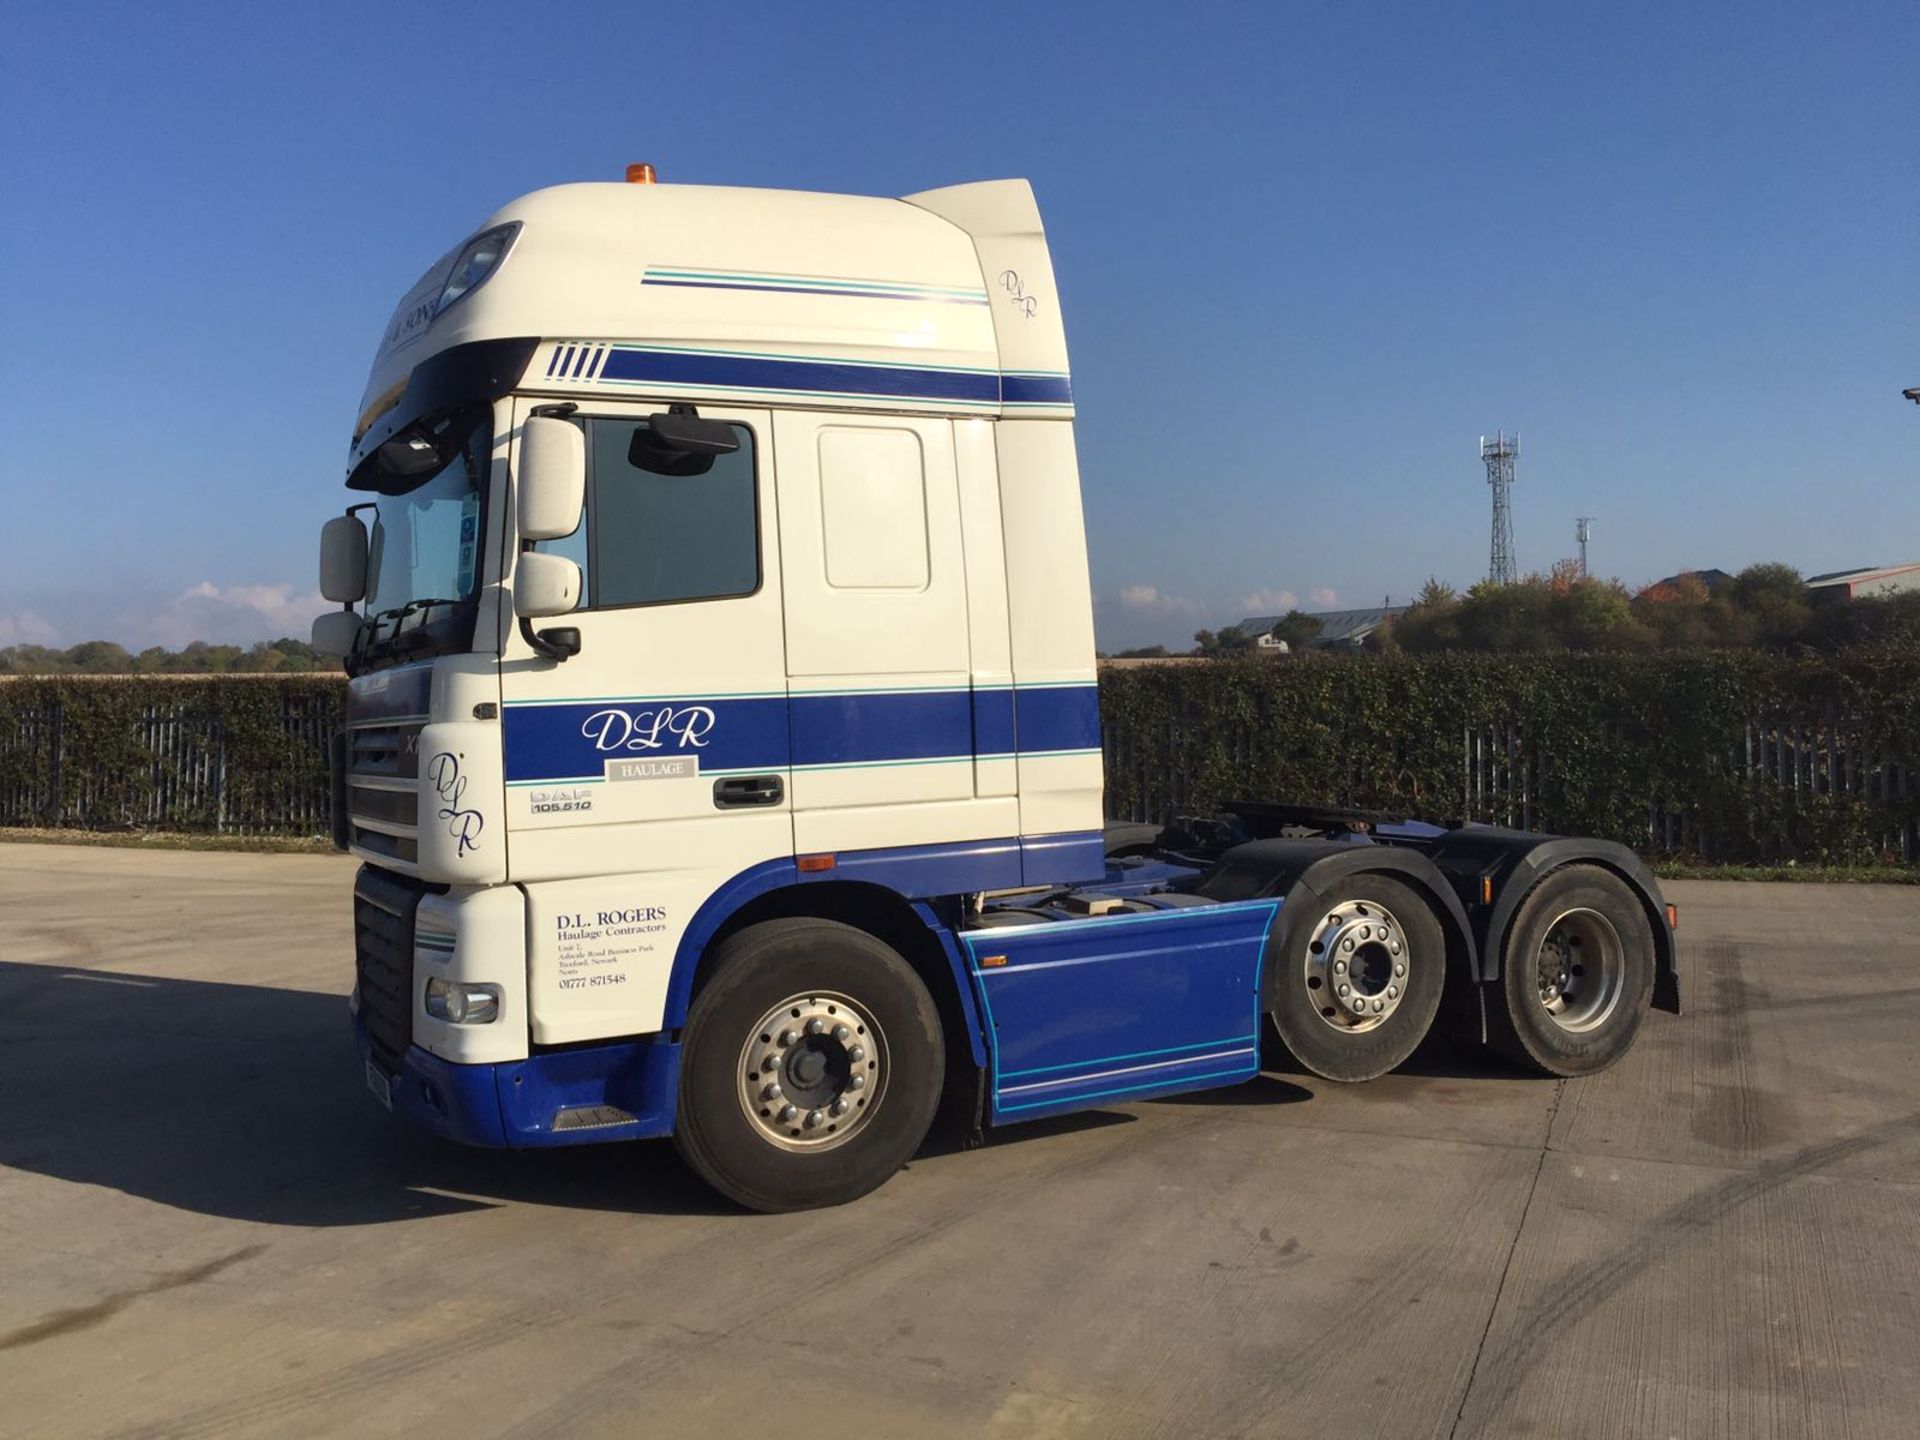 2011/11 REG DAF TRUCKS XF 105,510, SHOWING 1 OWNER WARRANTED LOW MILES - Image 3 of 29